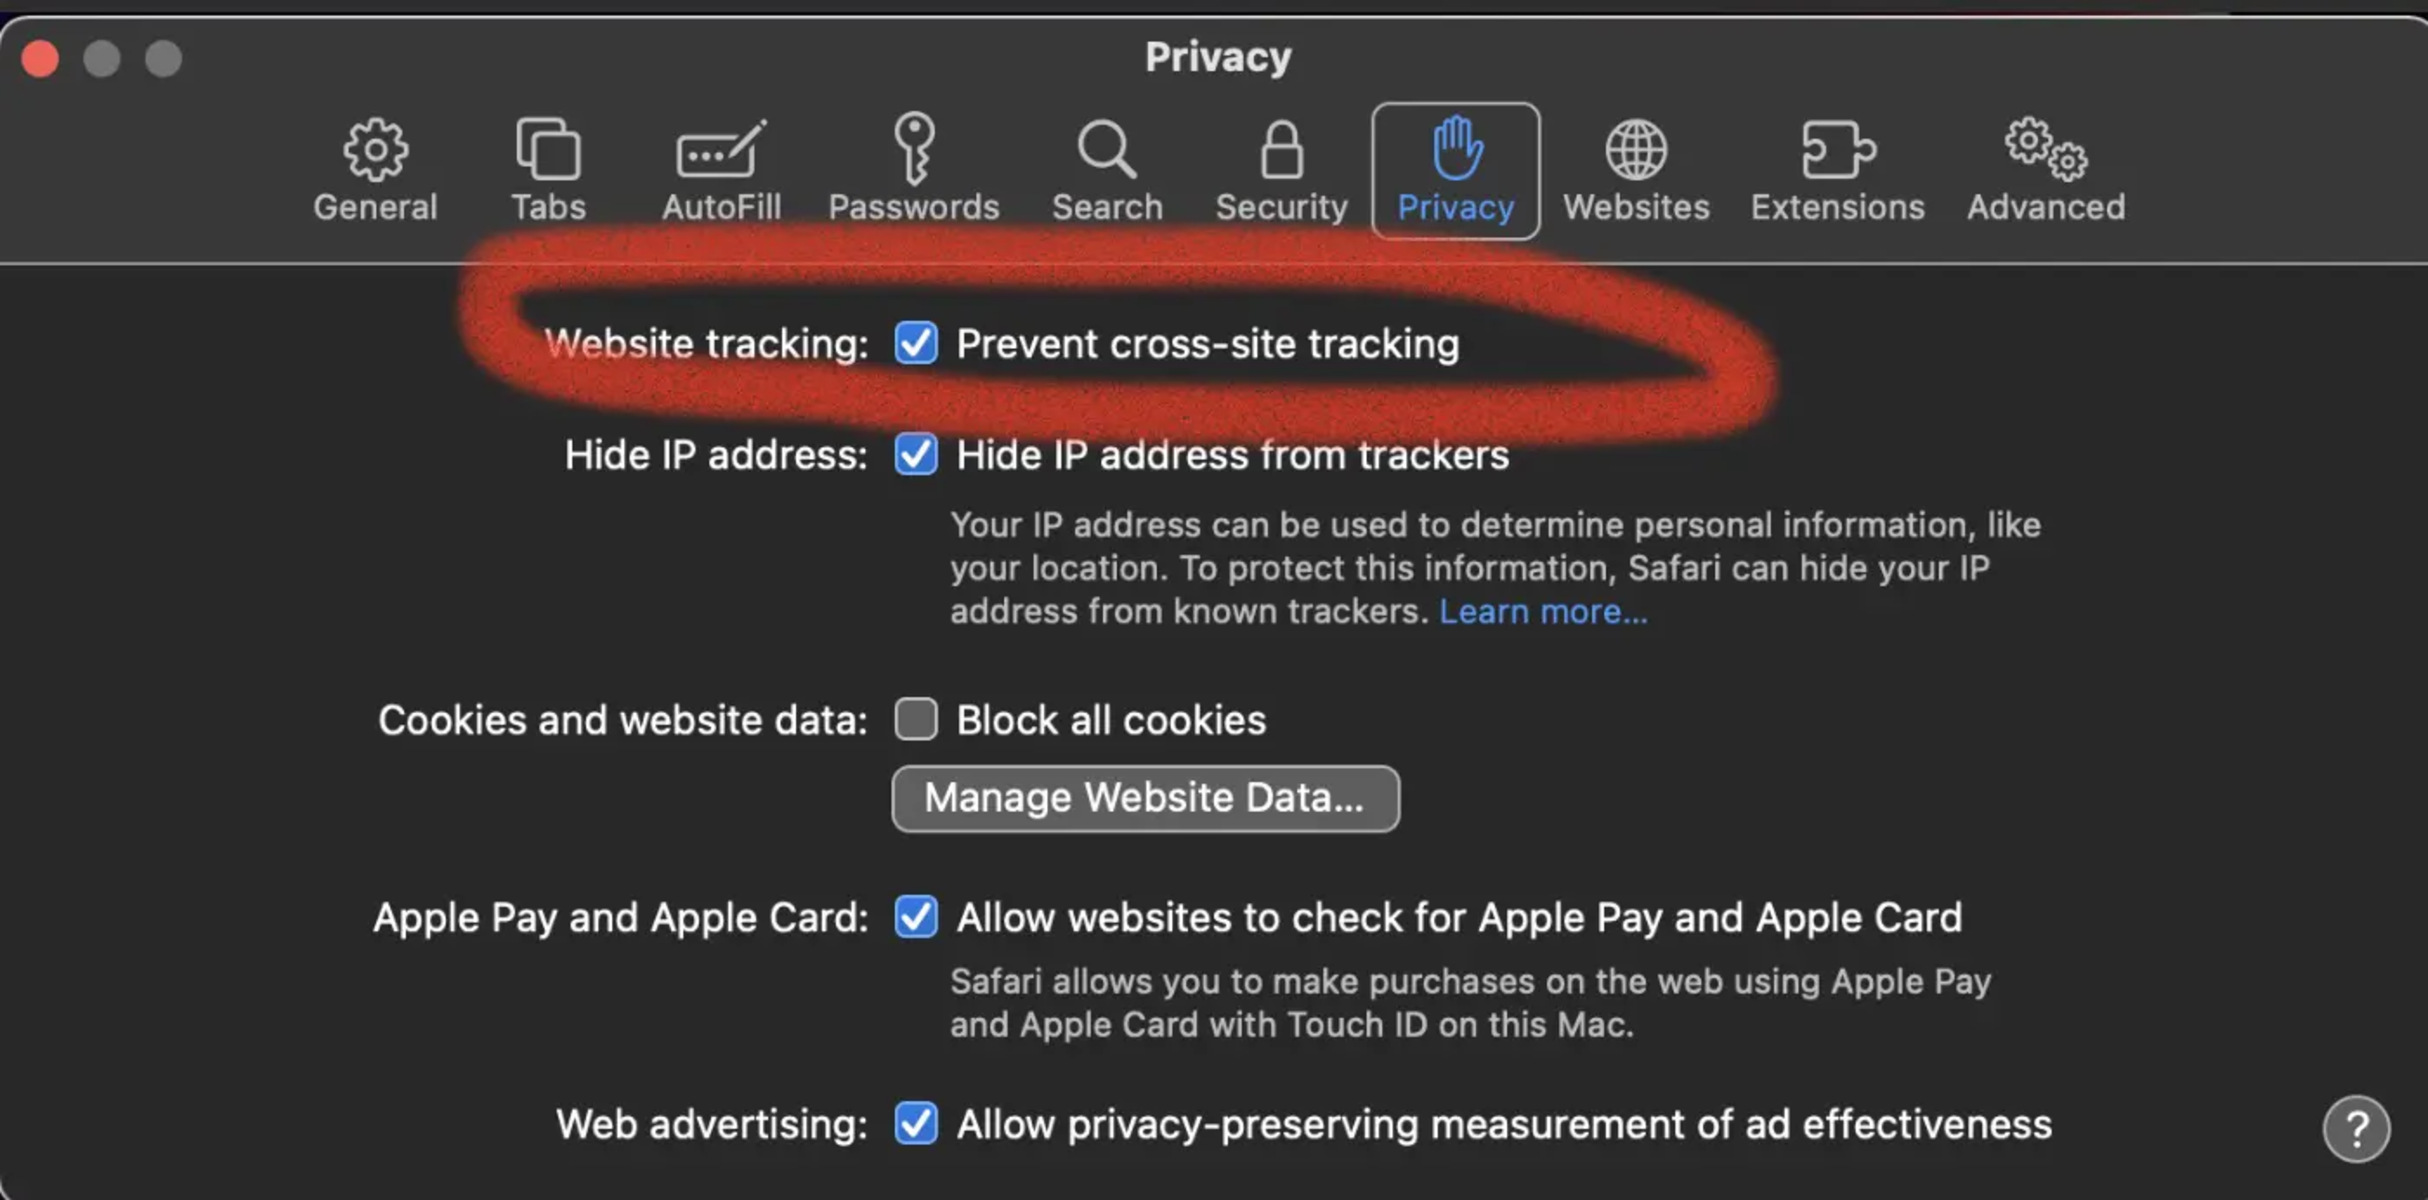 What Is Prevent Cross-Site Tracking In Safari